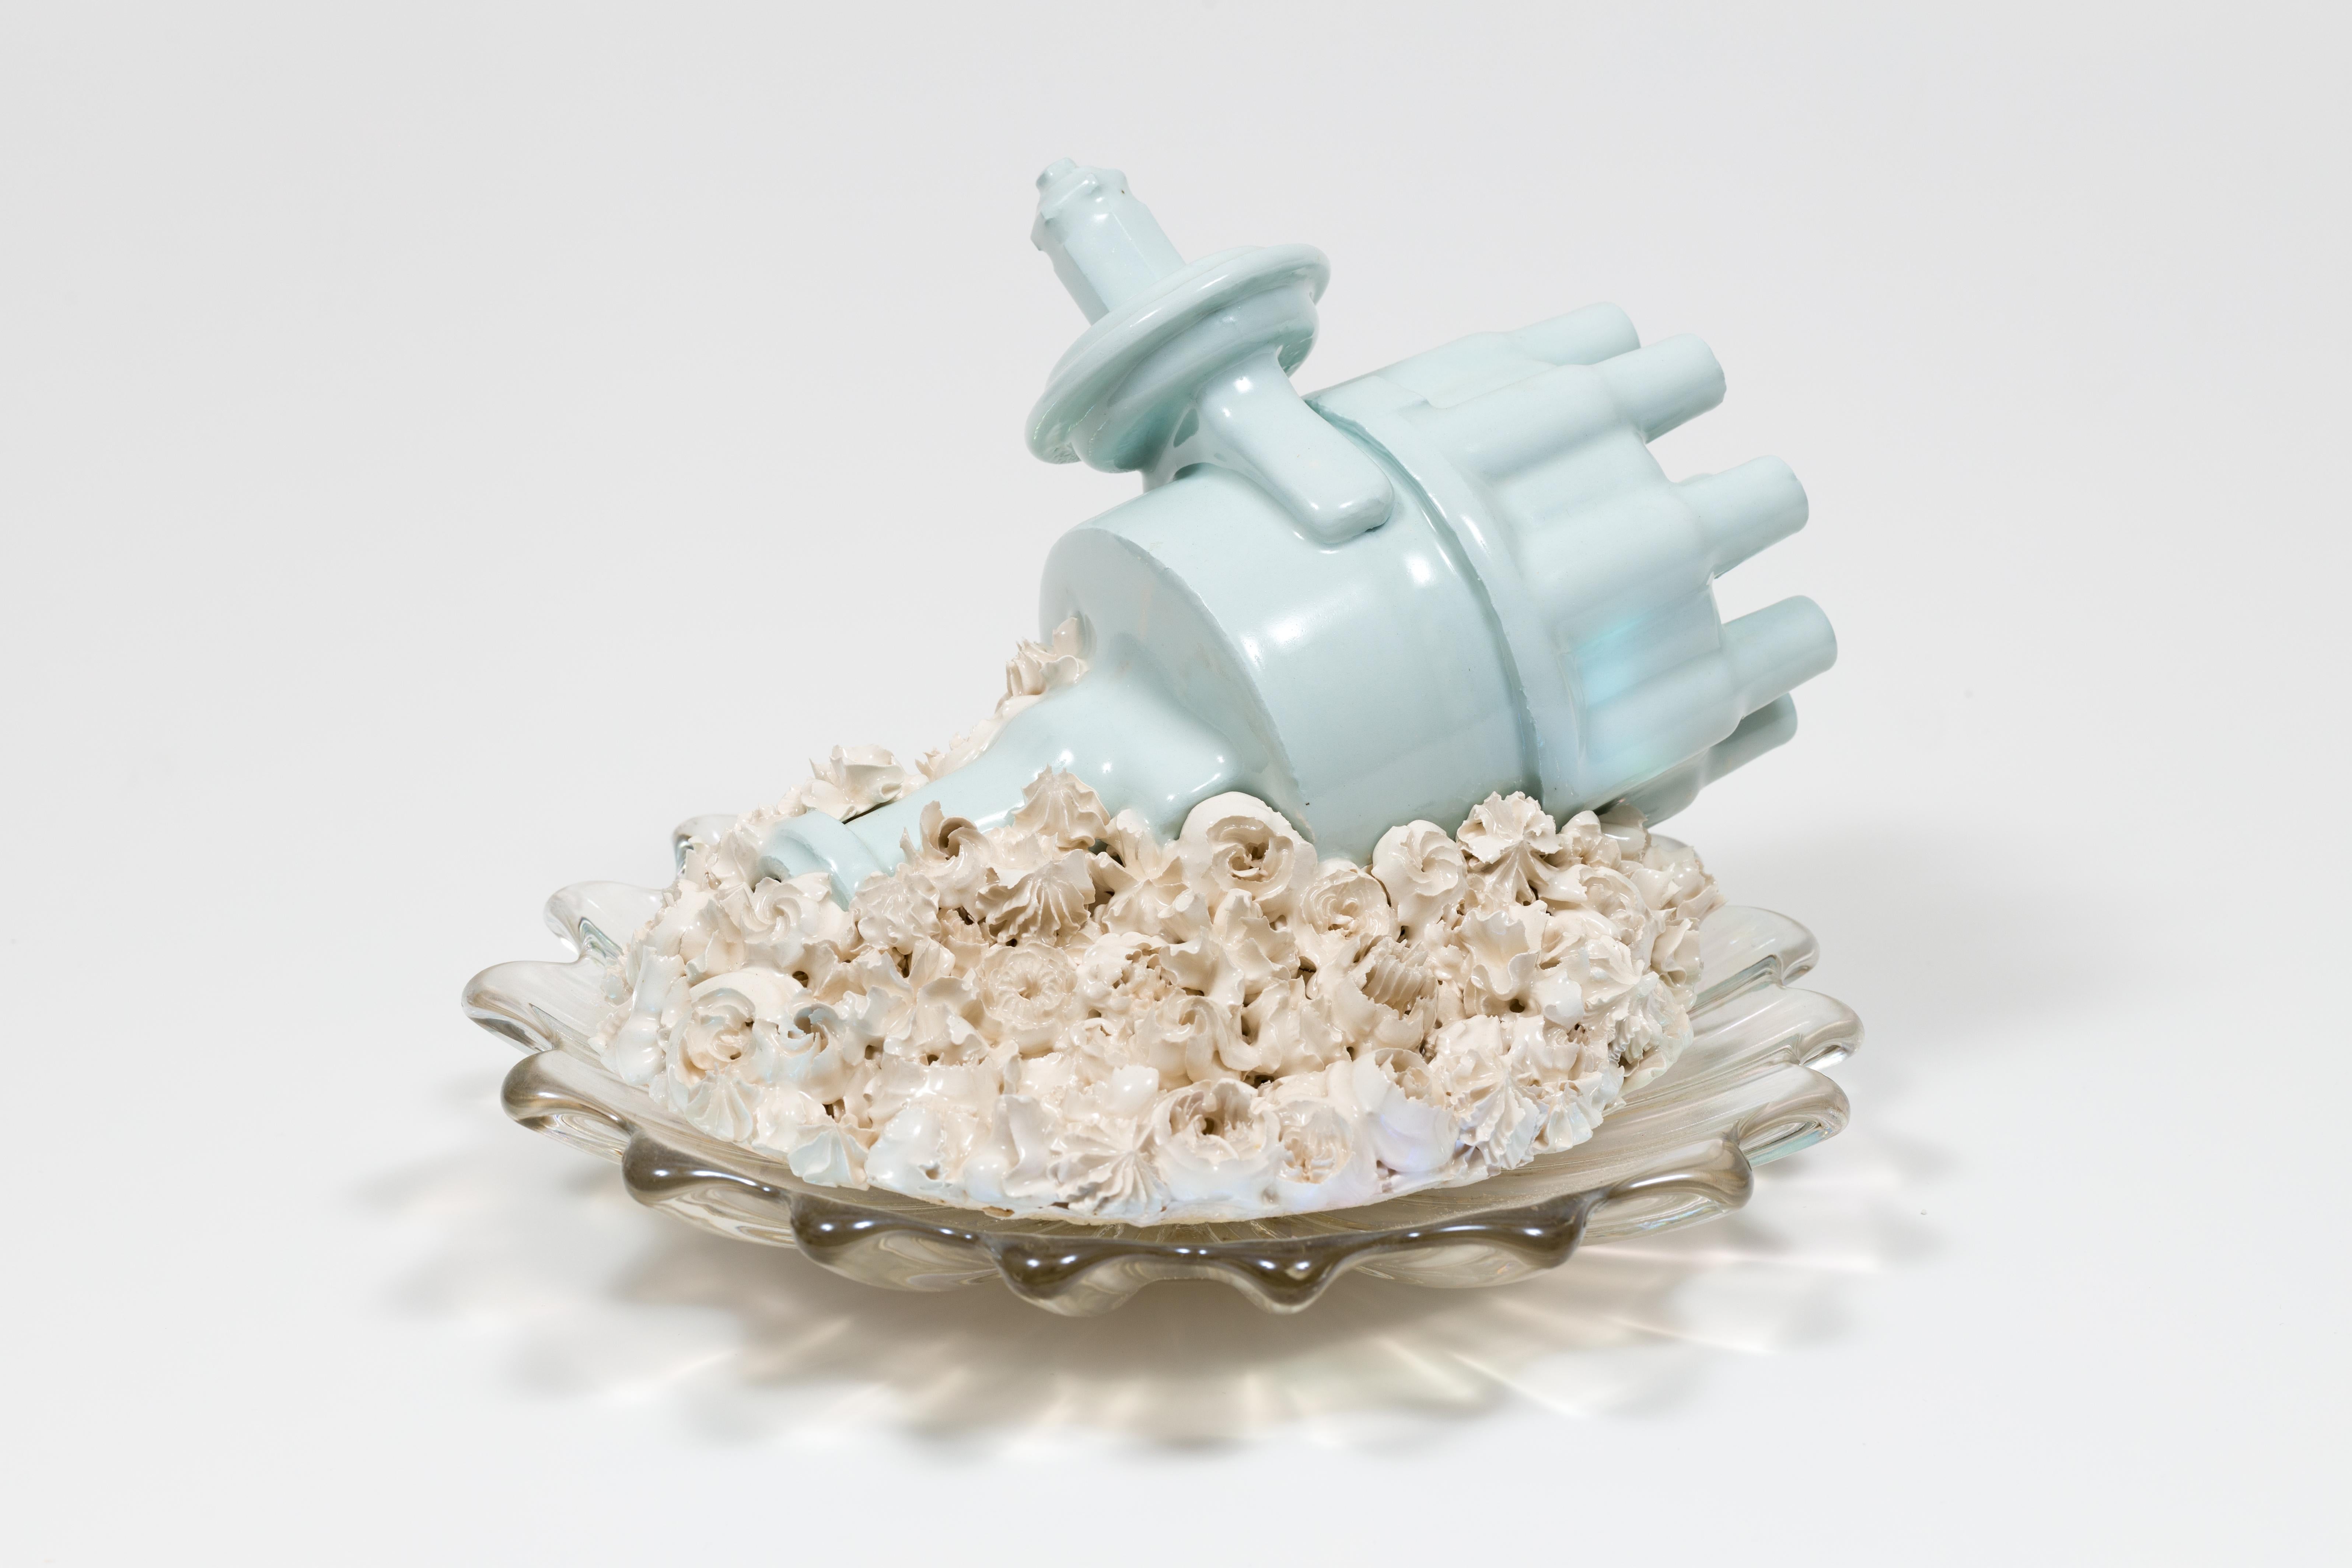 Lamenting the loss of the mechanical distributor - Contemporary Sculpture by Clint Neufeld